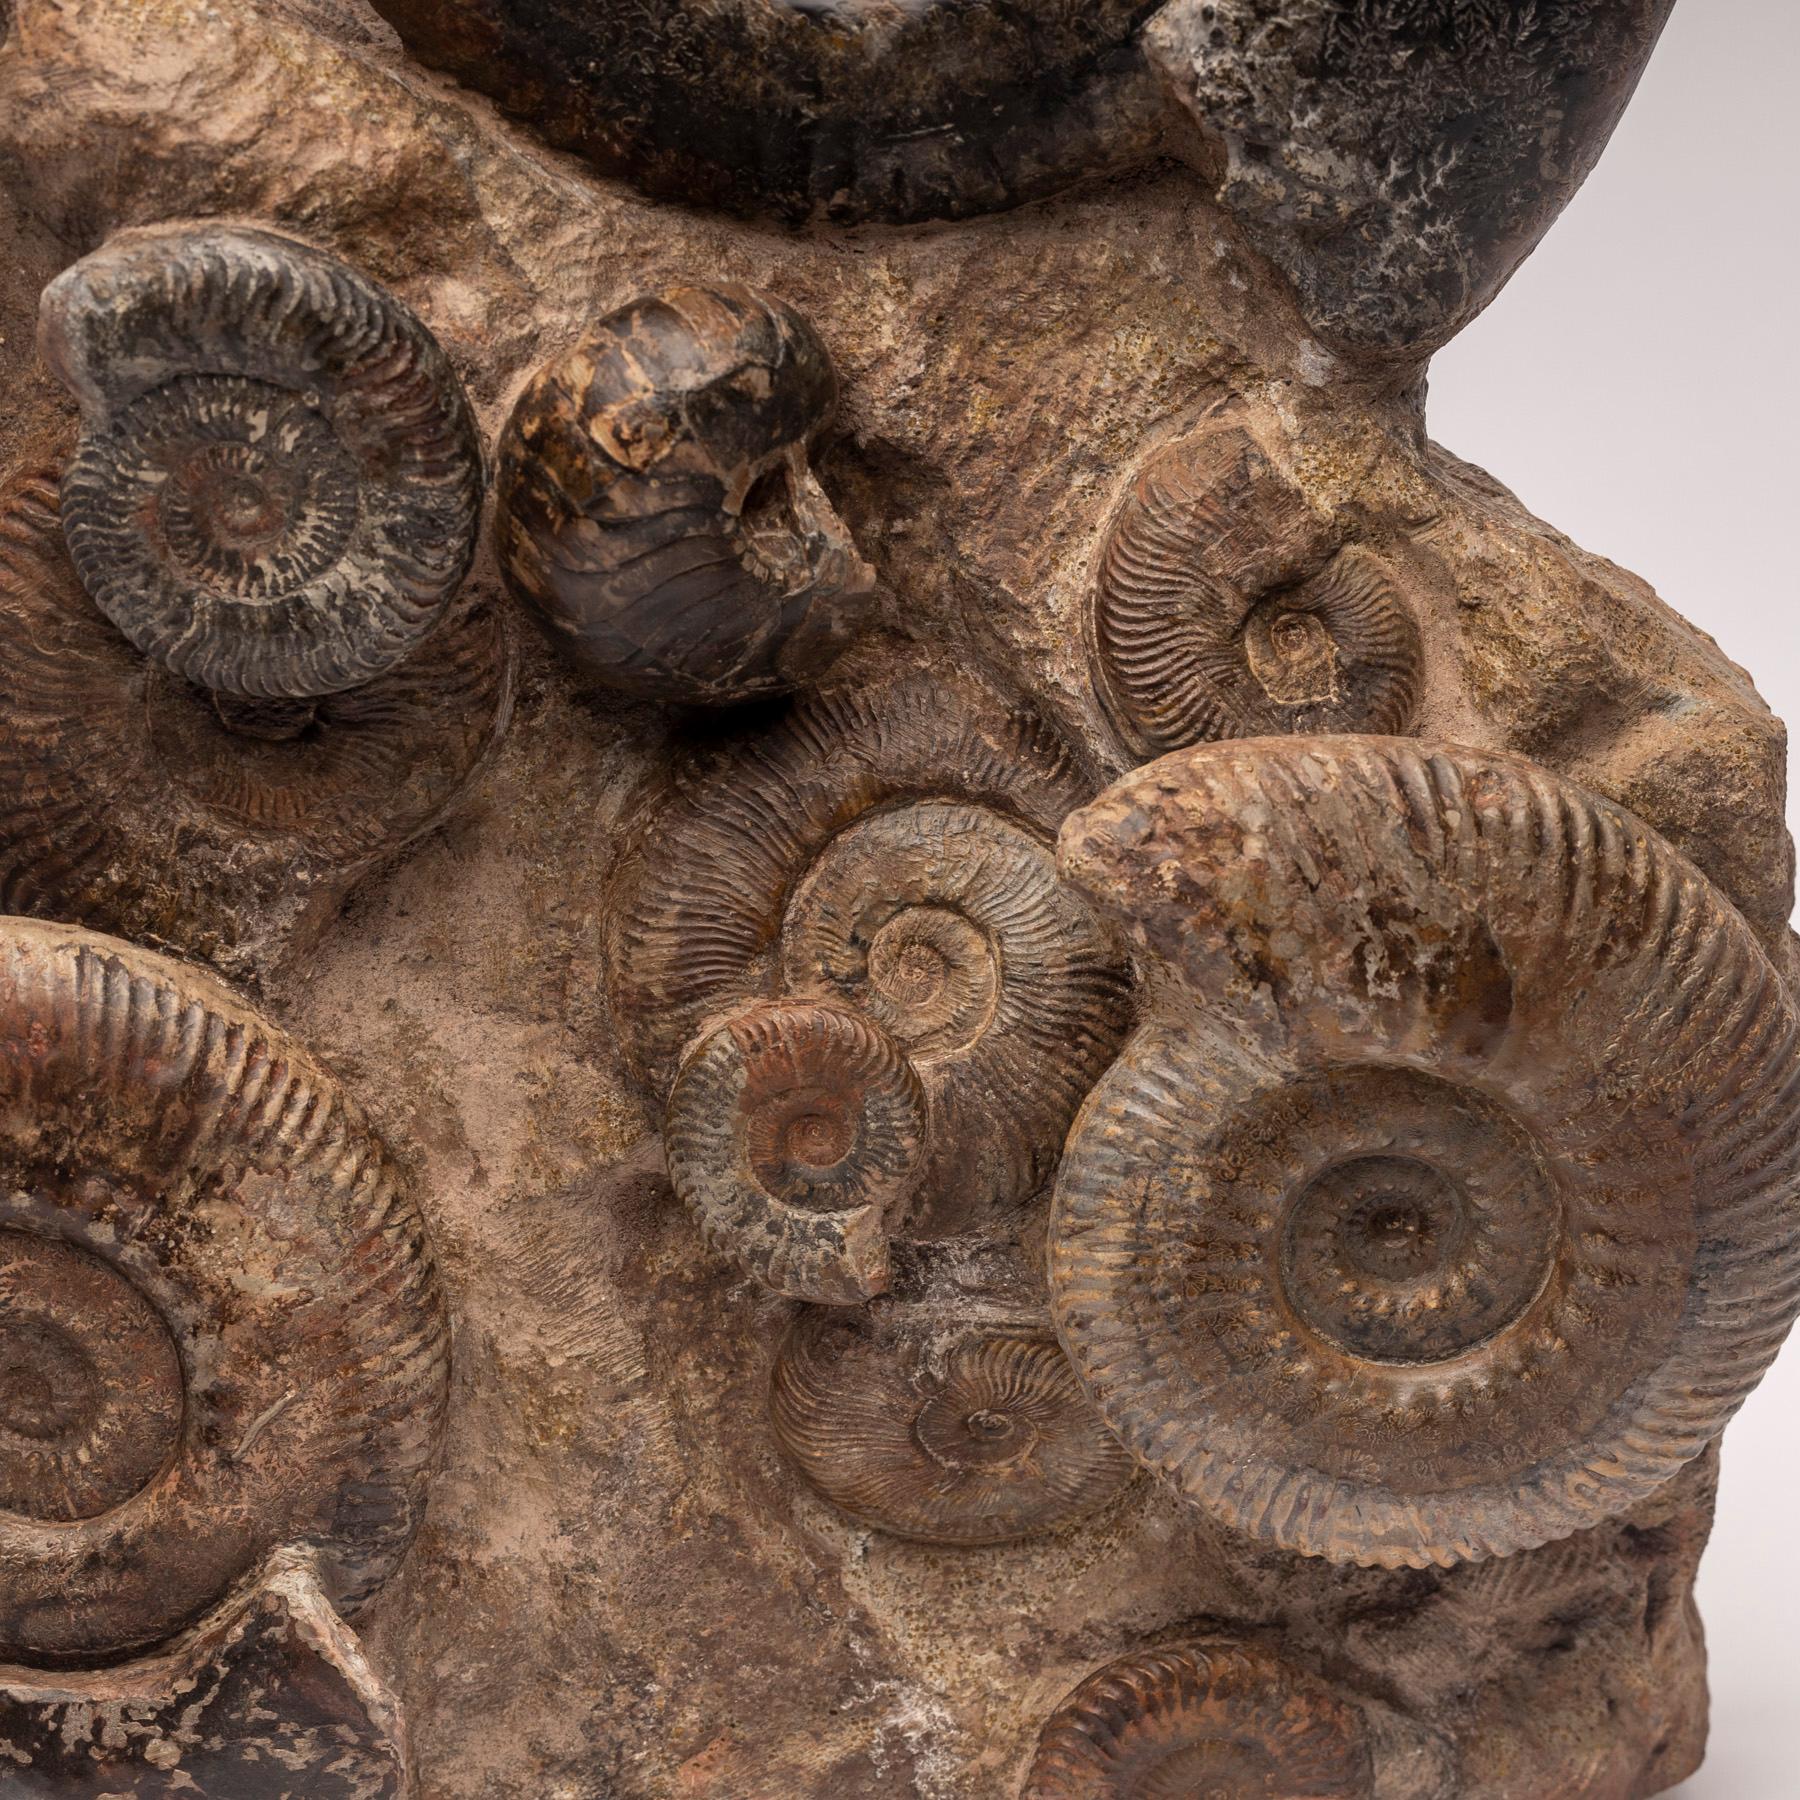 Other Free Standing Fossil Ammonite Cluster from Madagascar, Cretaceous Period